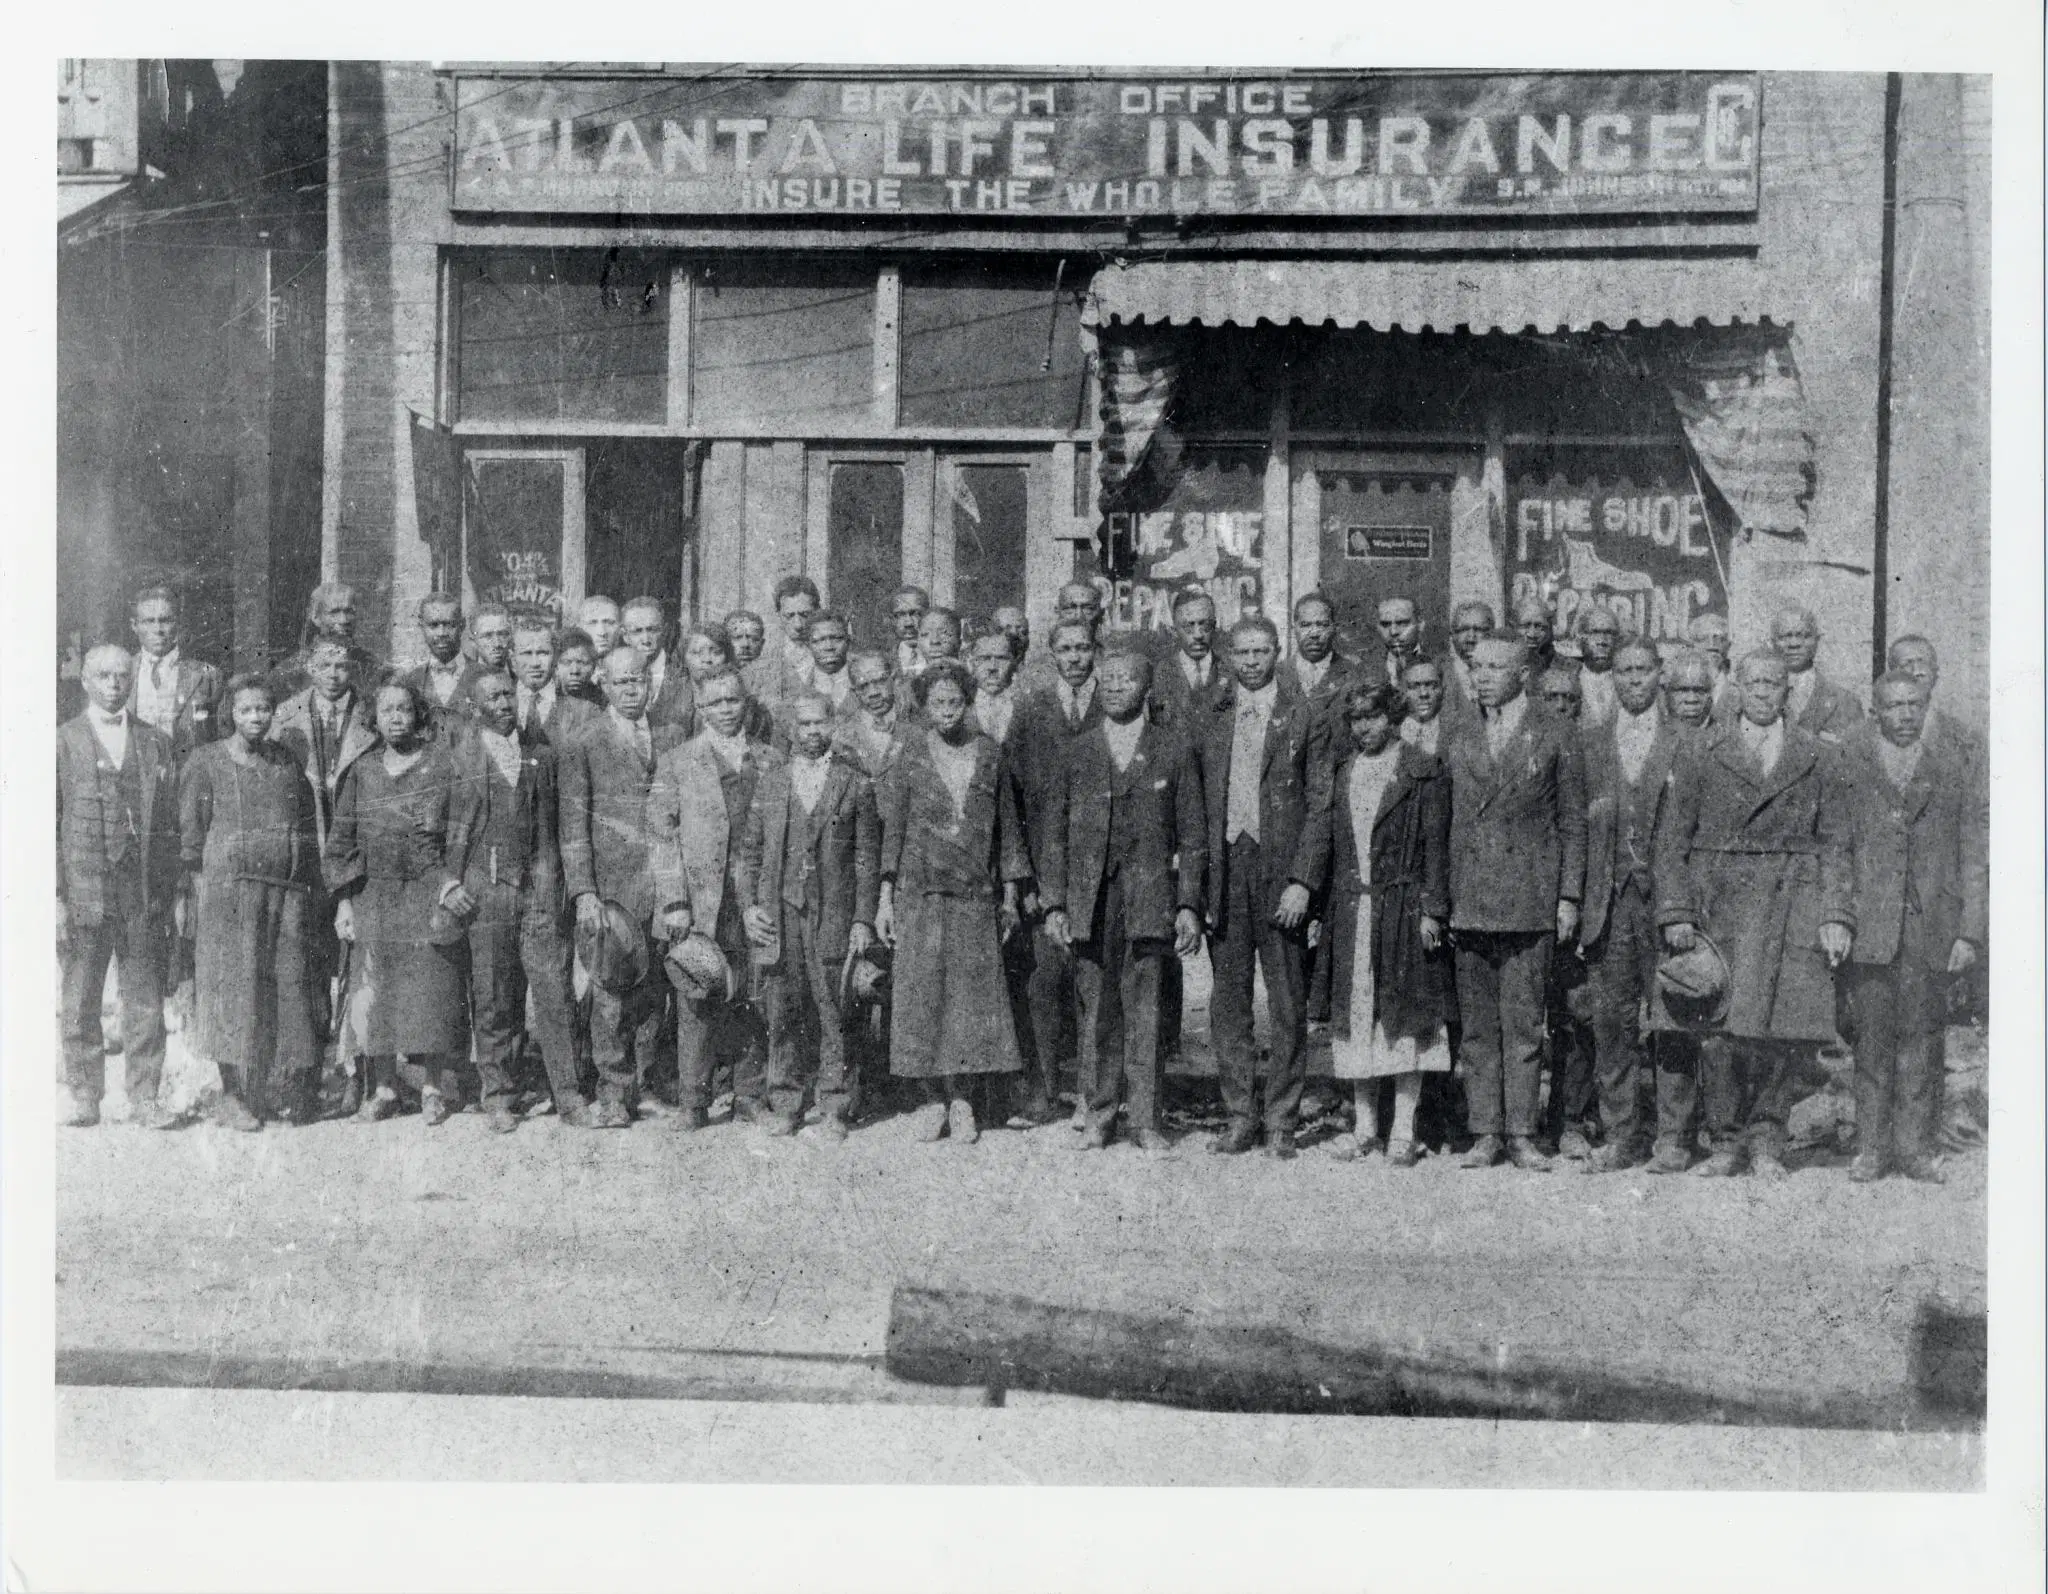 A historical image in front of the original Atlanta Life Insurance Company branch office in Atlanta. The company was founded by Alonzo Herndon more than 100 years ago and is still investing in the community and providing insurance to help policyholders build wealth and create legacies for their families.